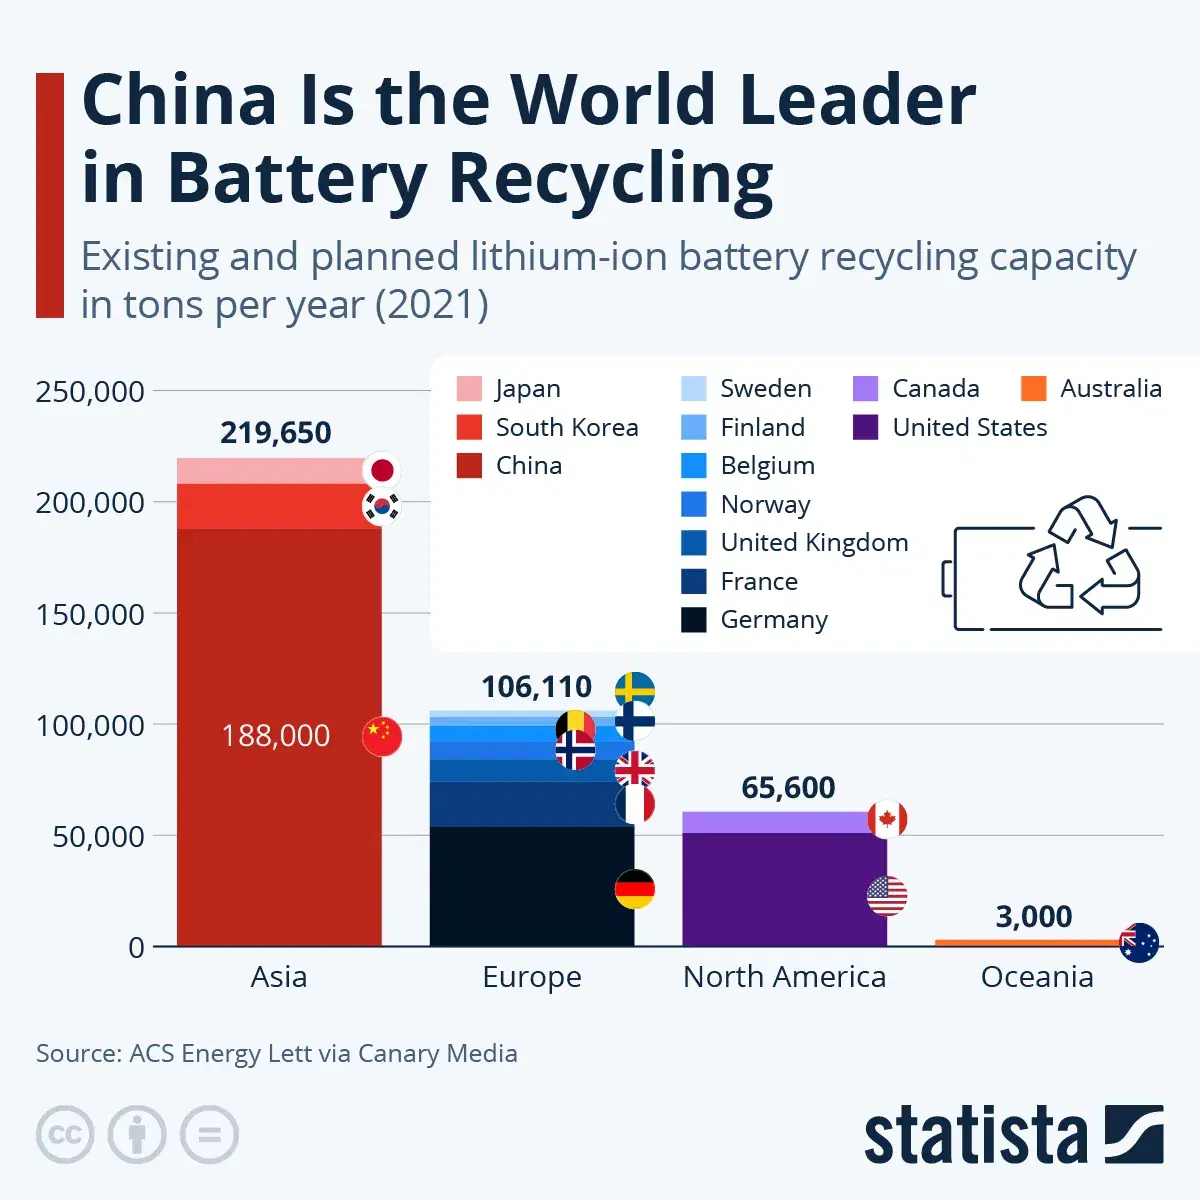 China Is the World Leader in Battery Recycling